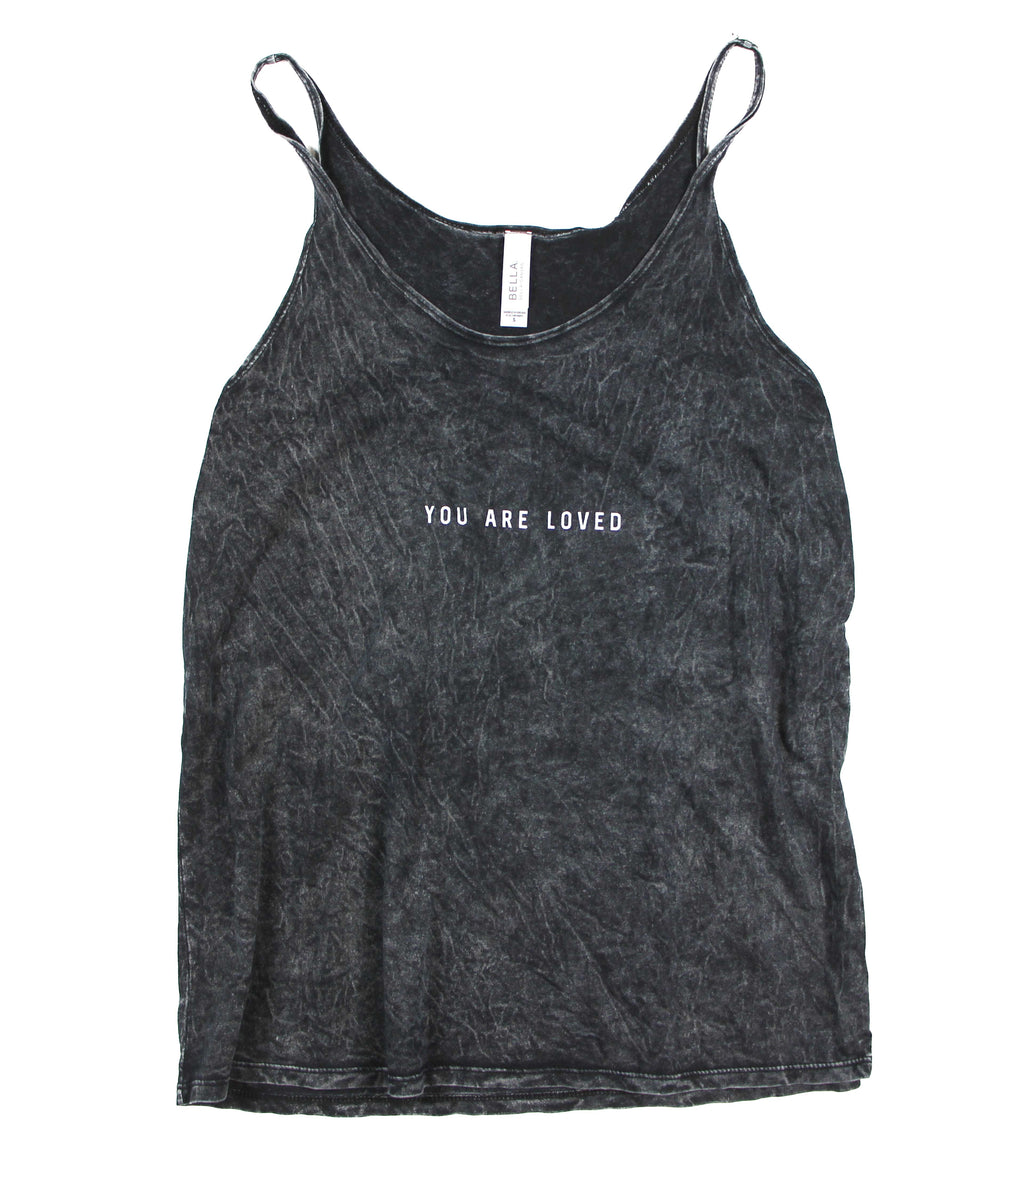 YOU ARE LOVED ACID WASH SLOUCHY TANK